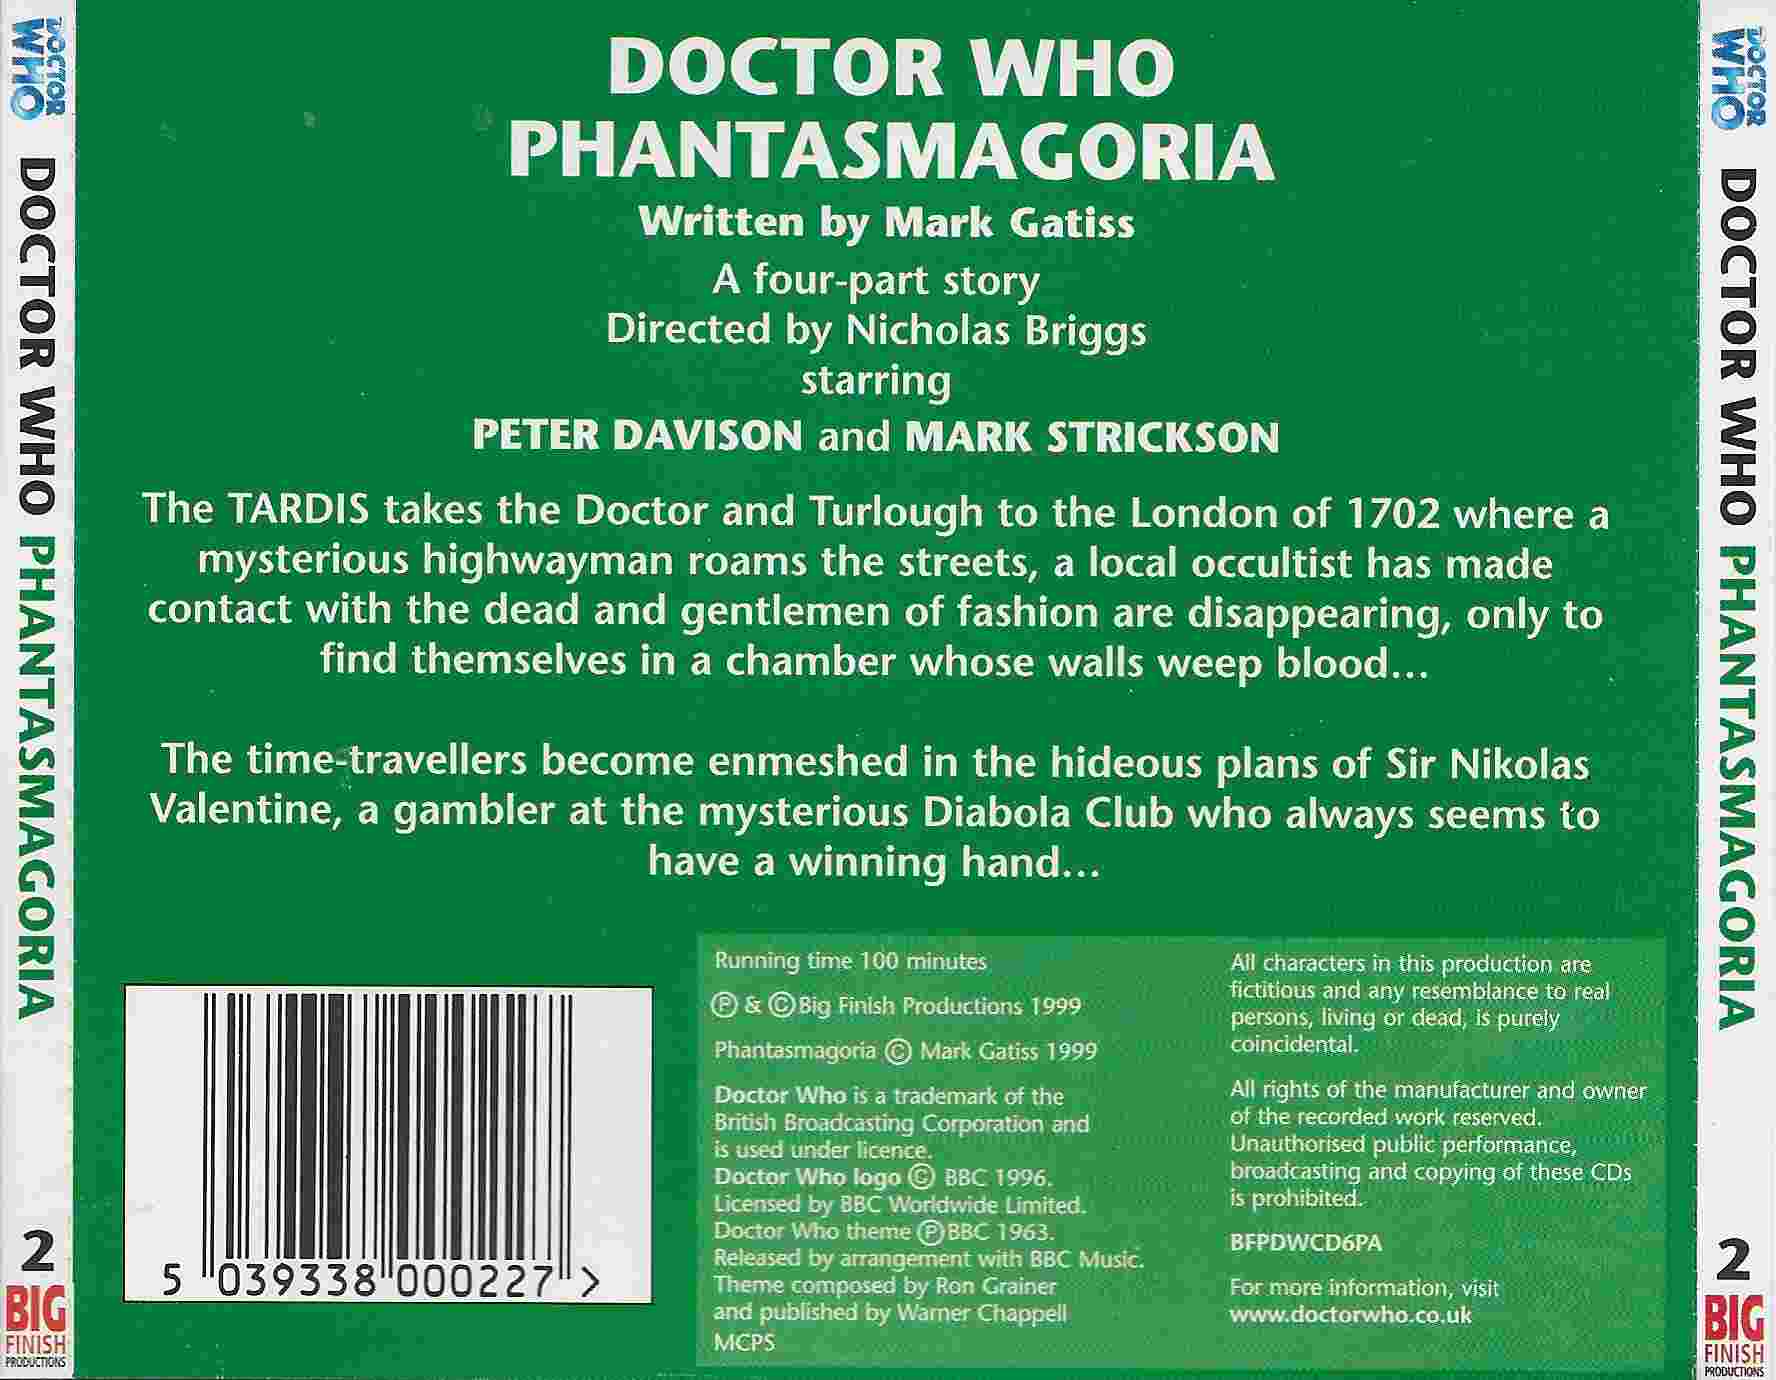 Back cover of BFPDWCD 6PA